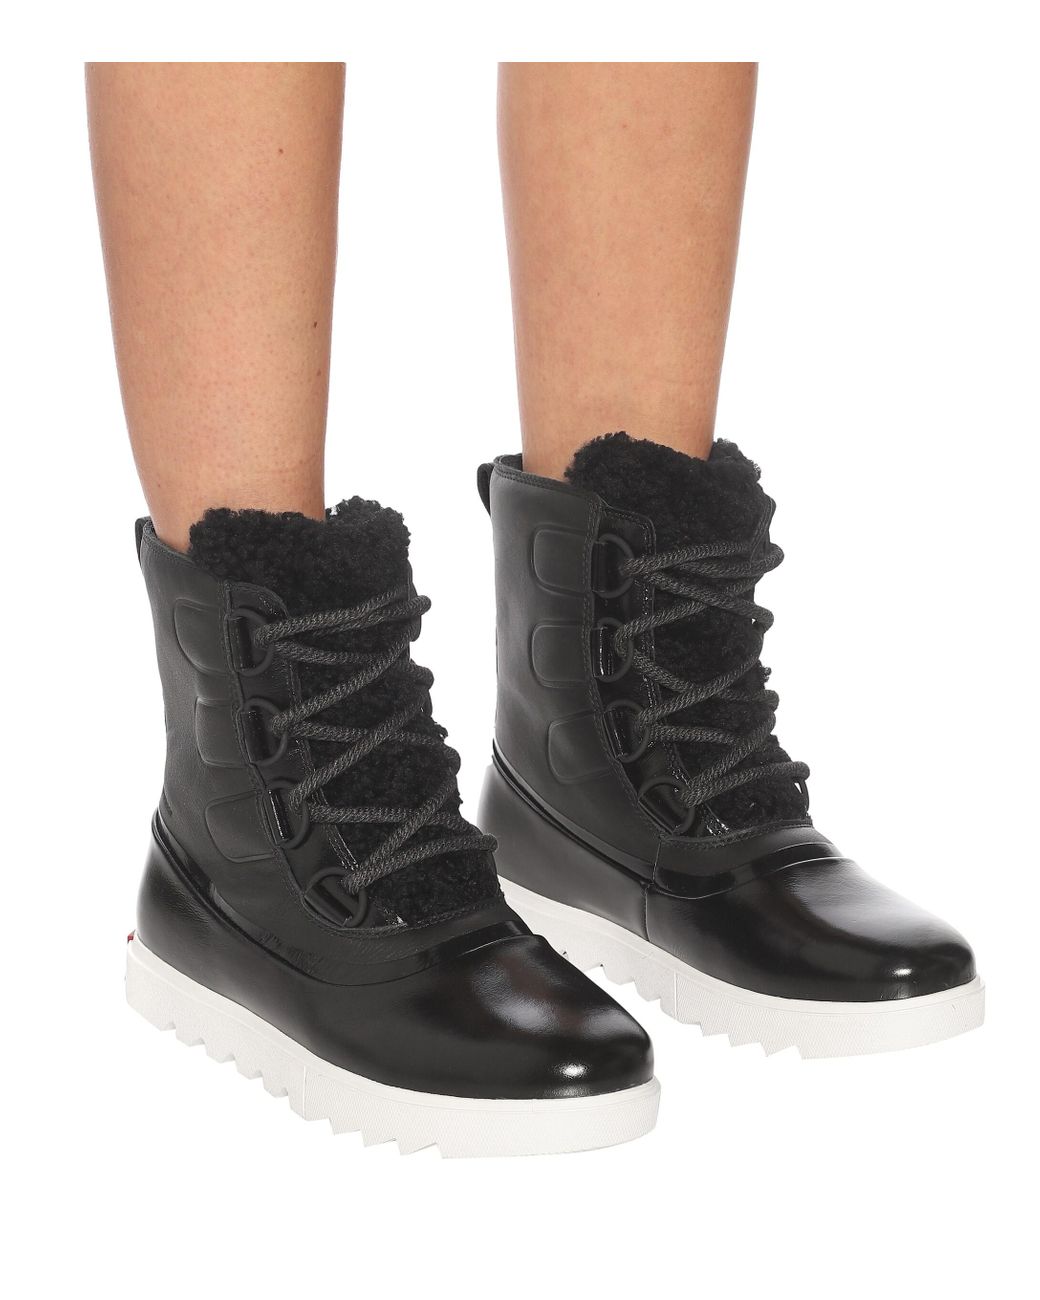 Sorel Joan Of Arctic Next Lite Leather Snow Boots in Black - Lyst